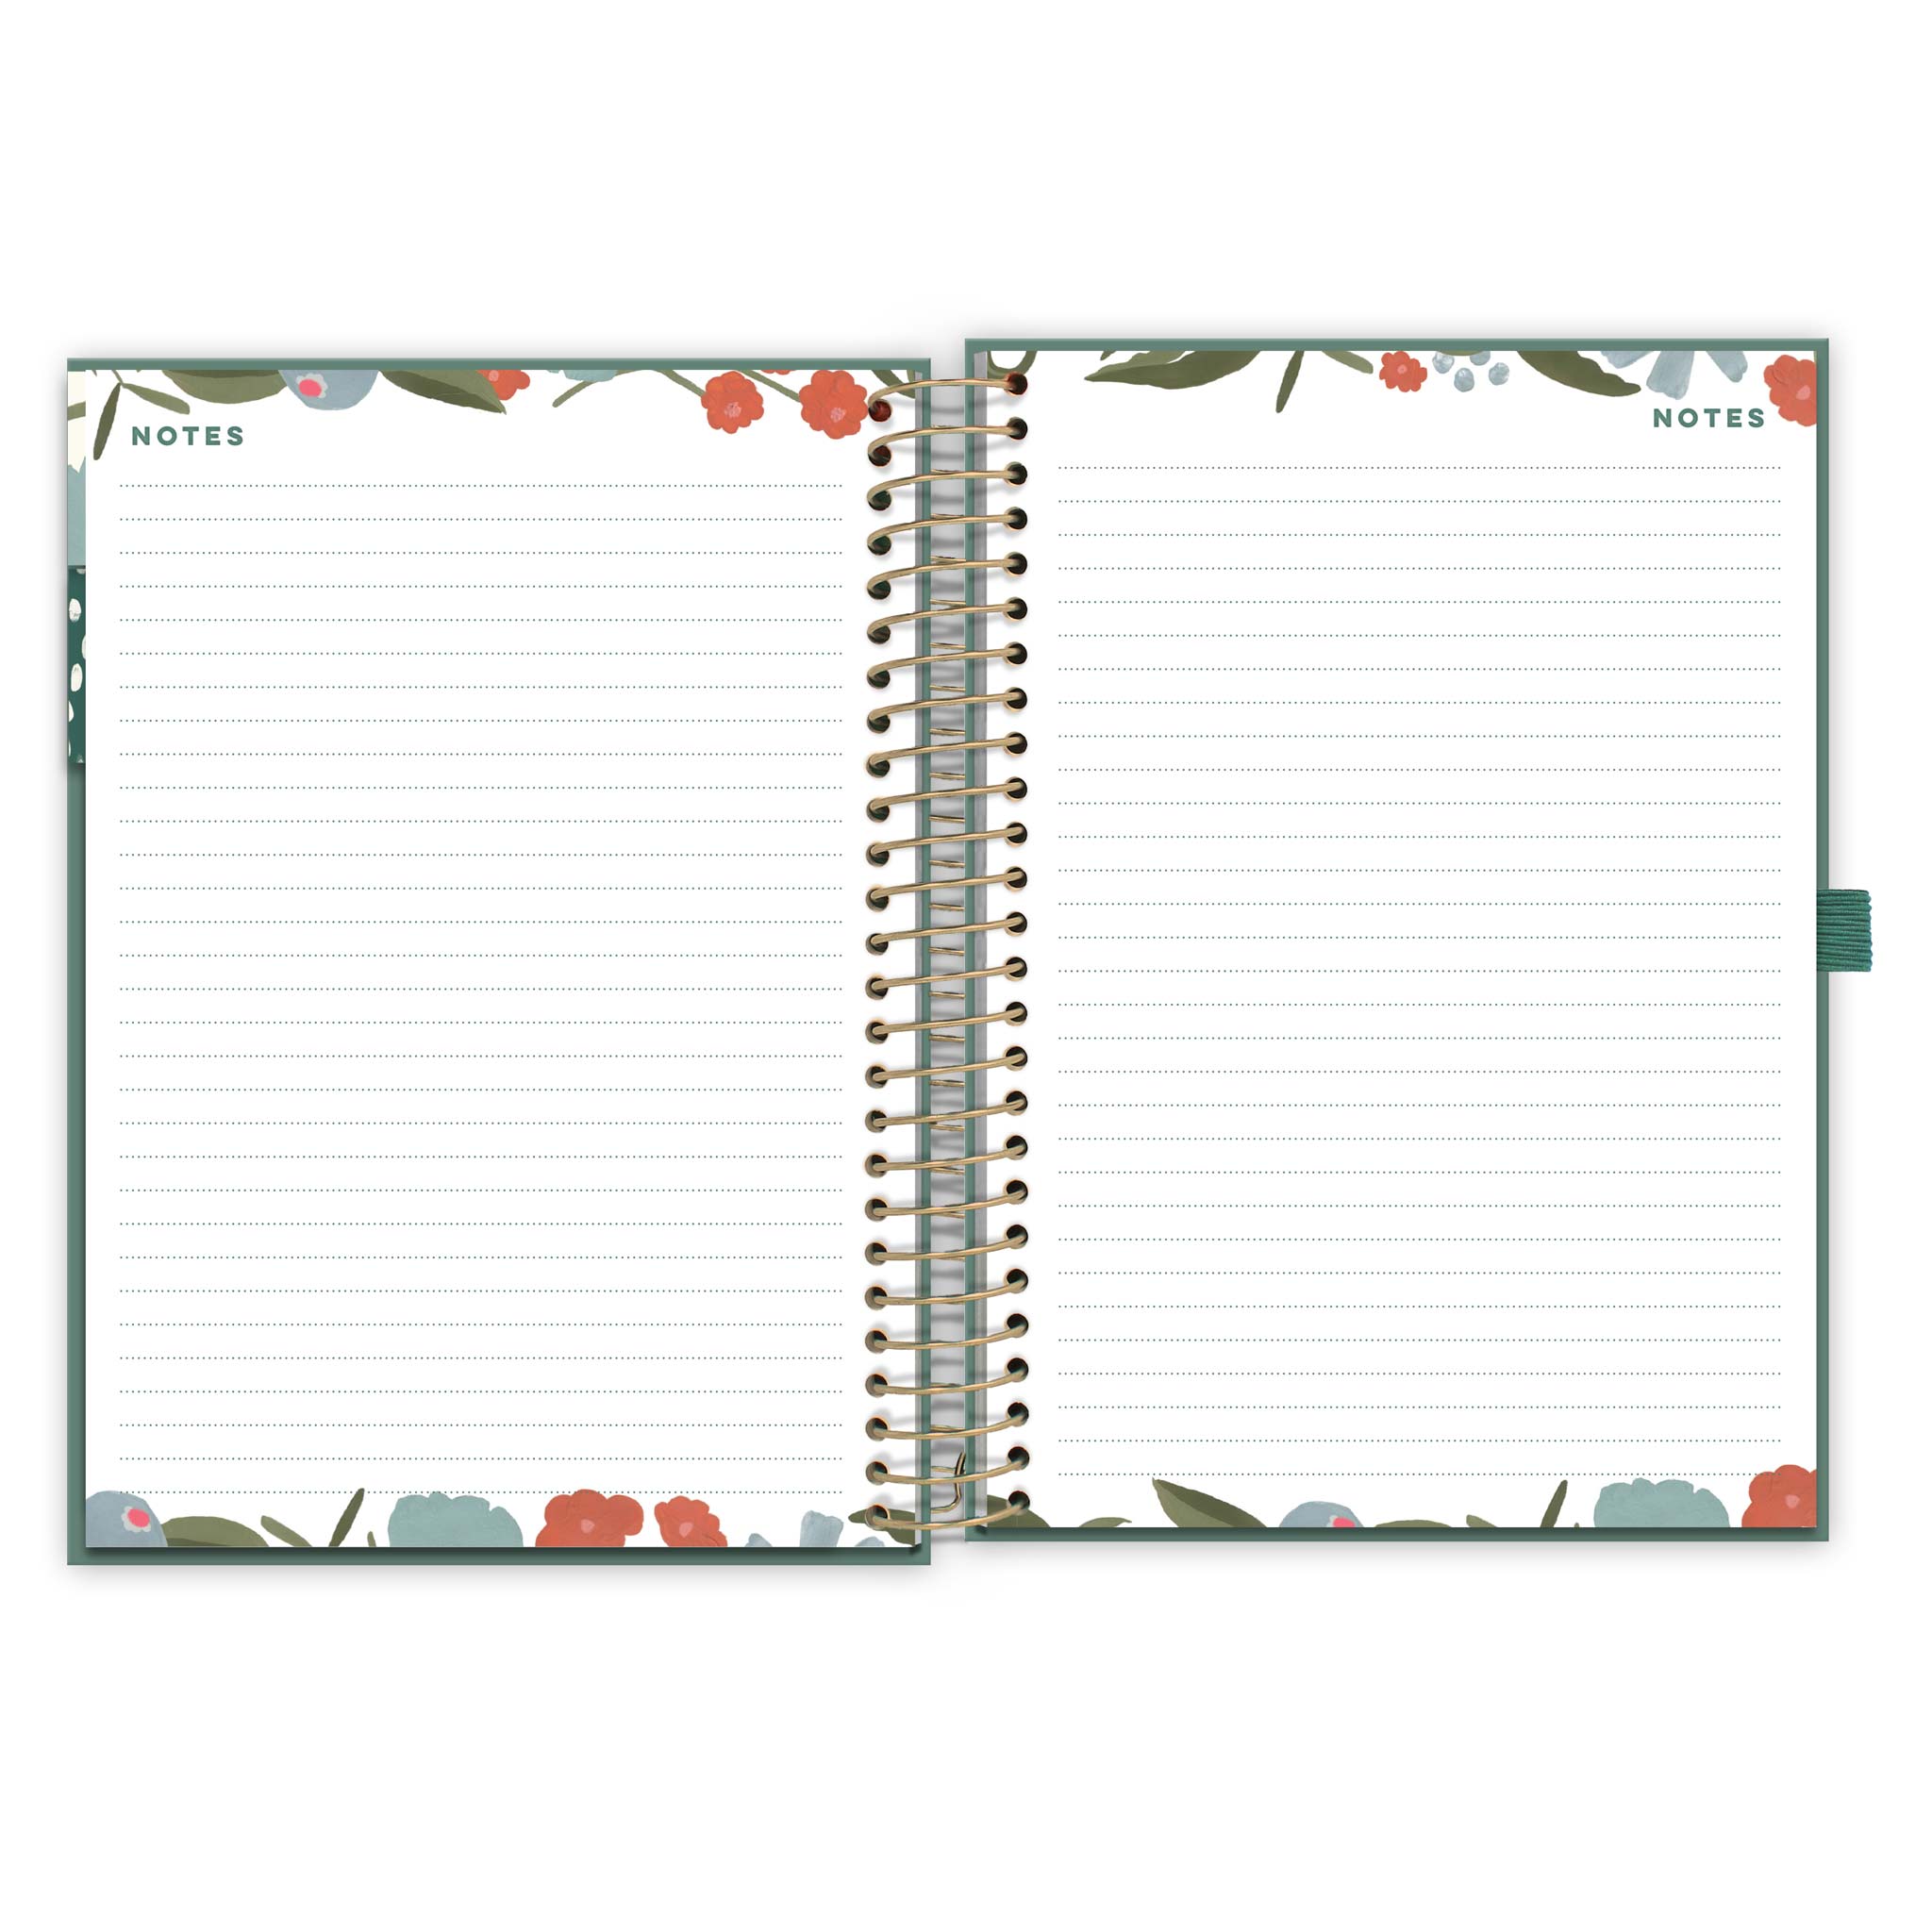 &quot;An open diary spread with floral pattern showing lined note pages &quot;